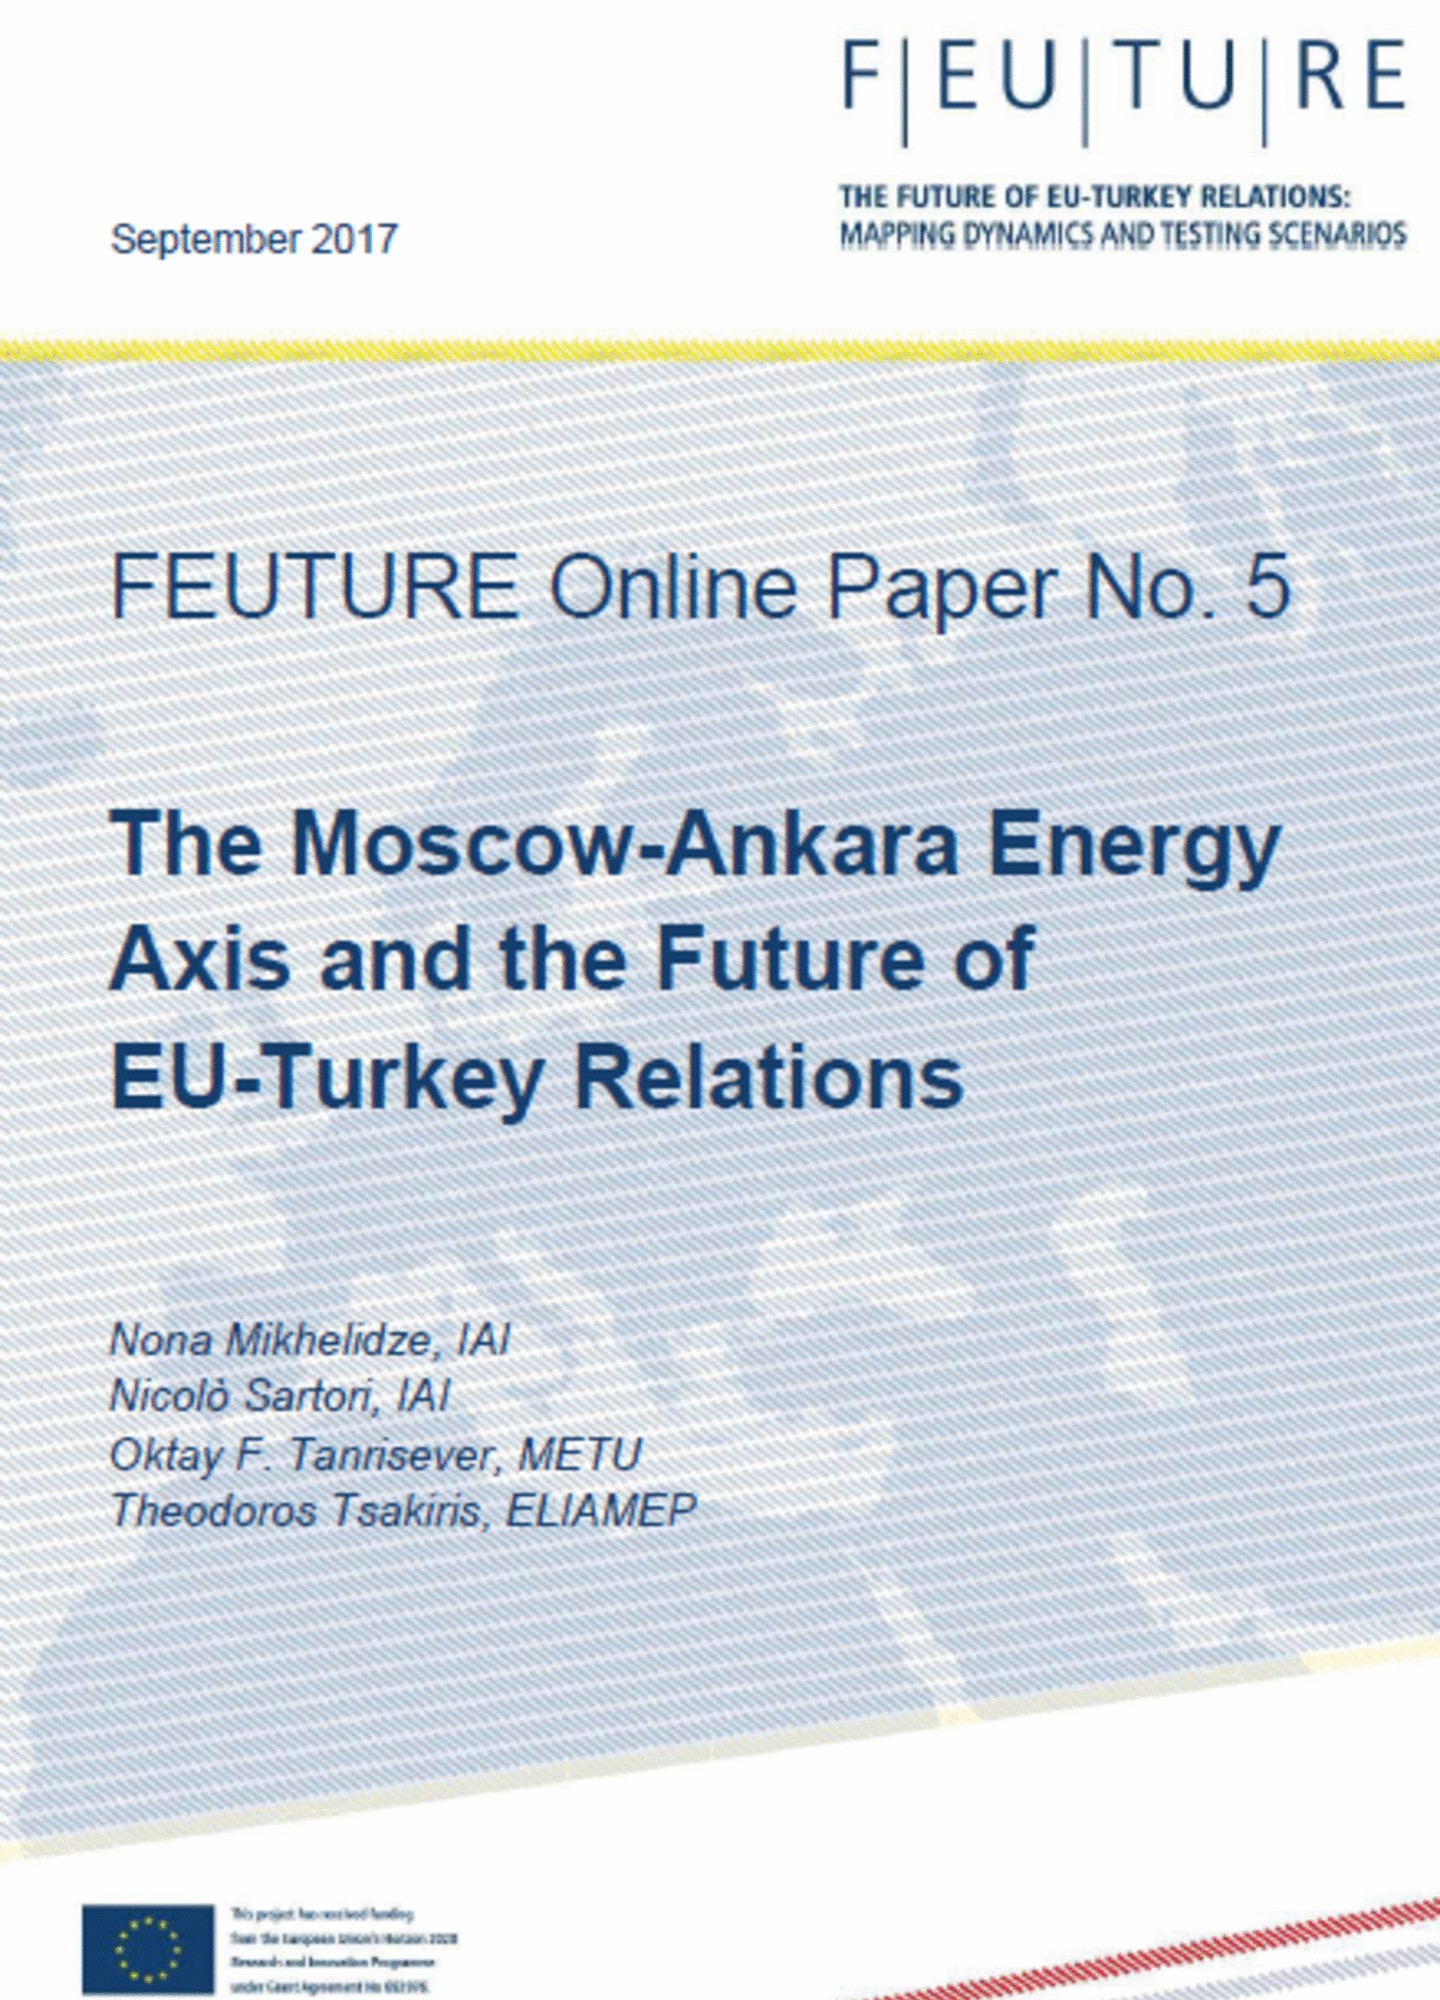 The Moscow-Ankara Energy Axis and the Future of EU-Turkey Relations